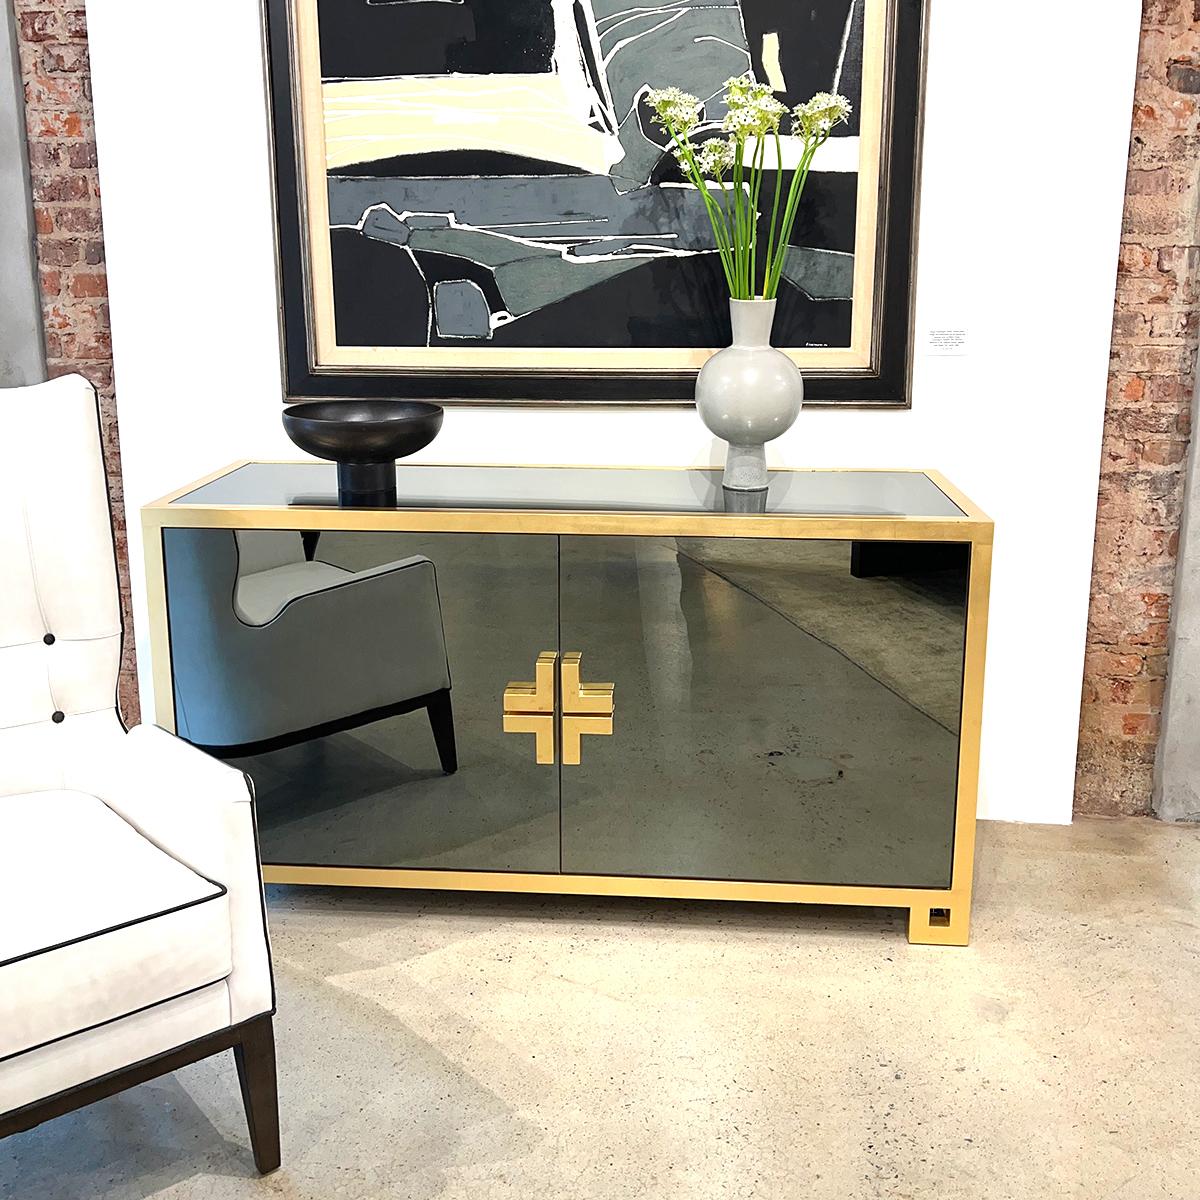 Modern Smoked Mirror Credenza with a gilded frame, two wide doors open to a finished interior with an adjustable shelf. Solid brass accents and handles. The top, sides, and front doors are all smoked mirror glass. 

Dimensions: 67